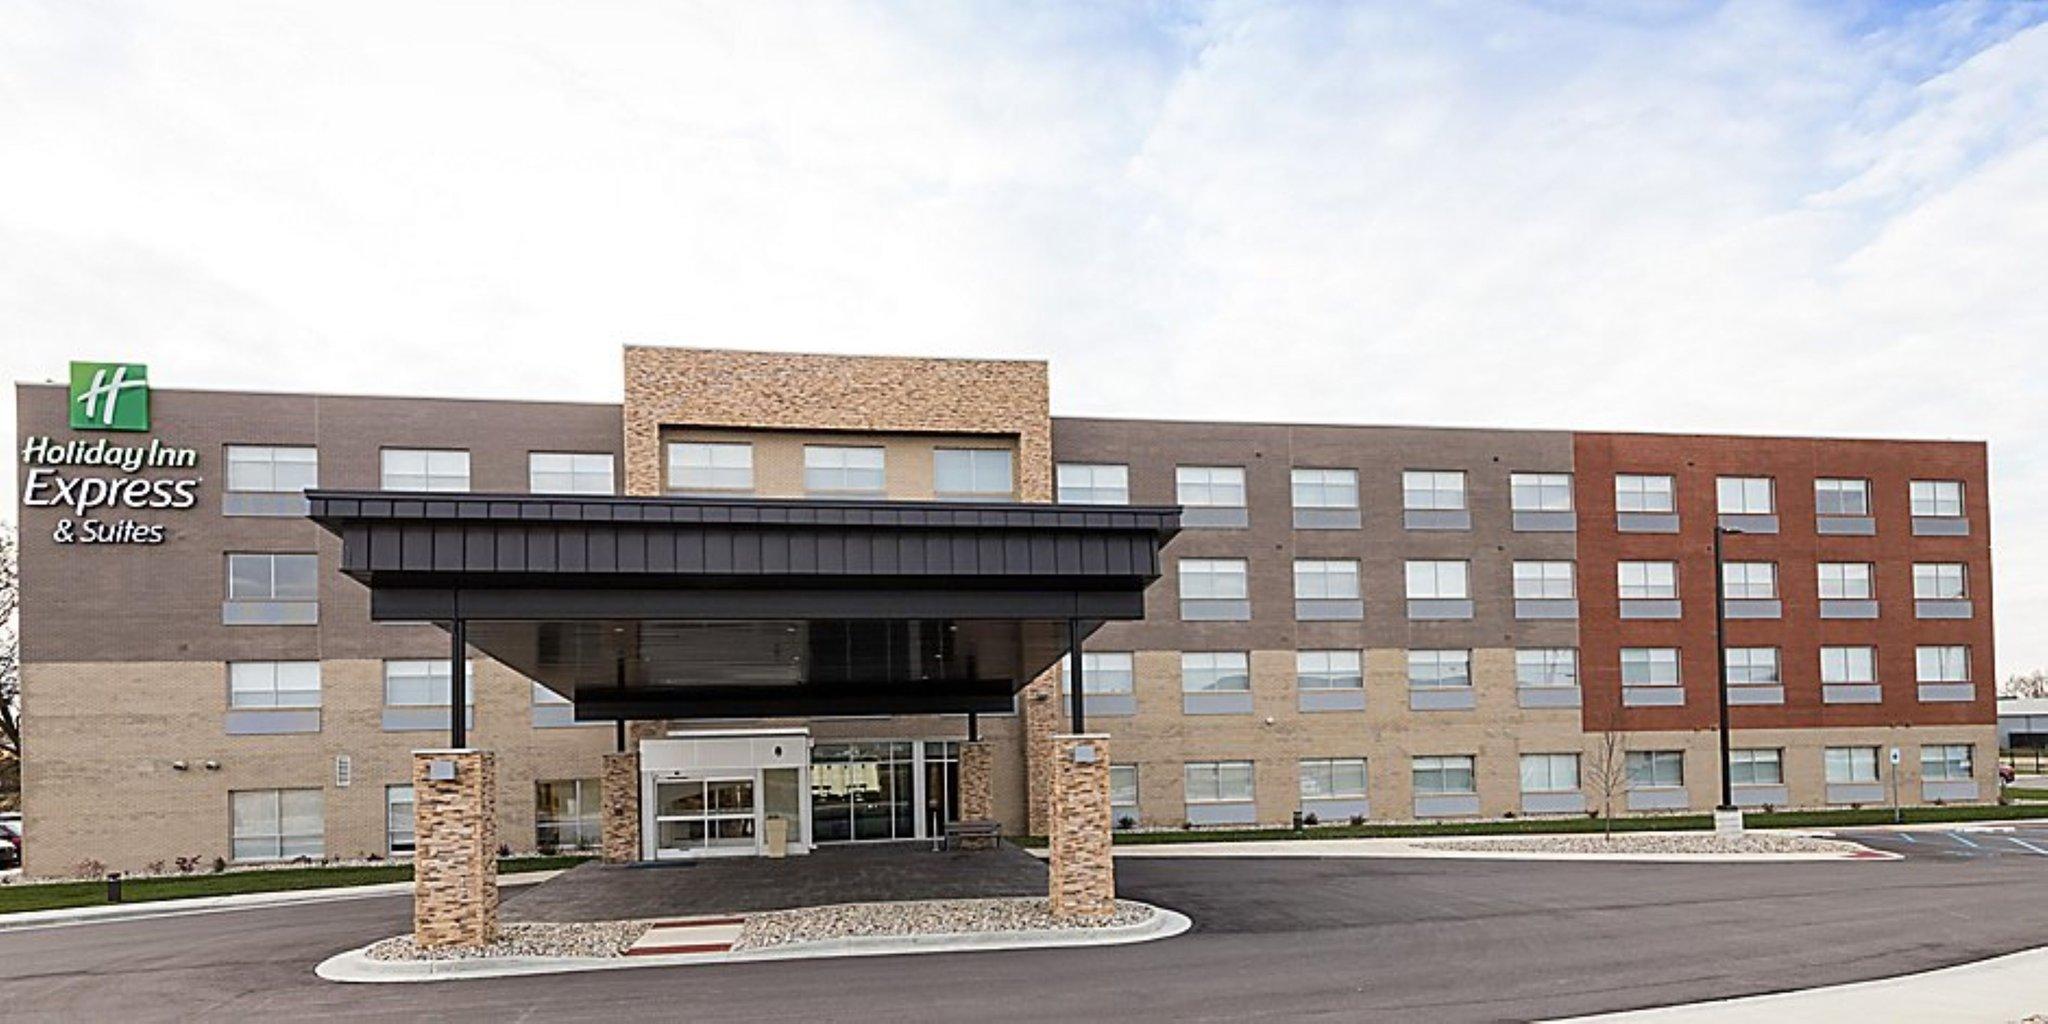 Holiday Inn Express & Suites Michigan City in Michigan City, IN